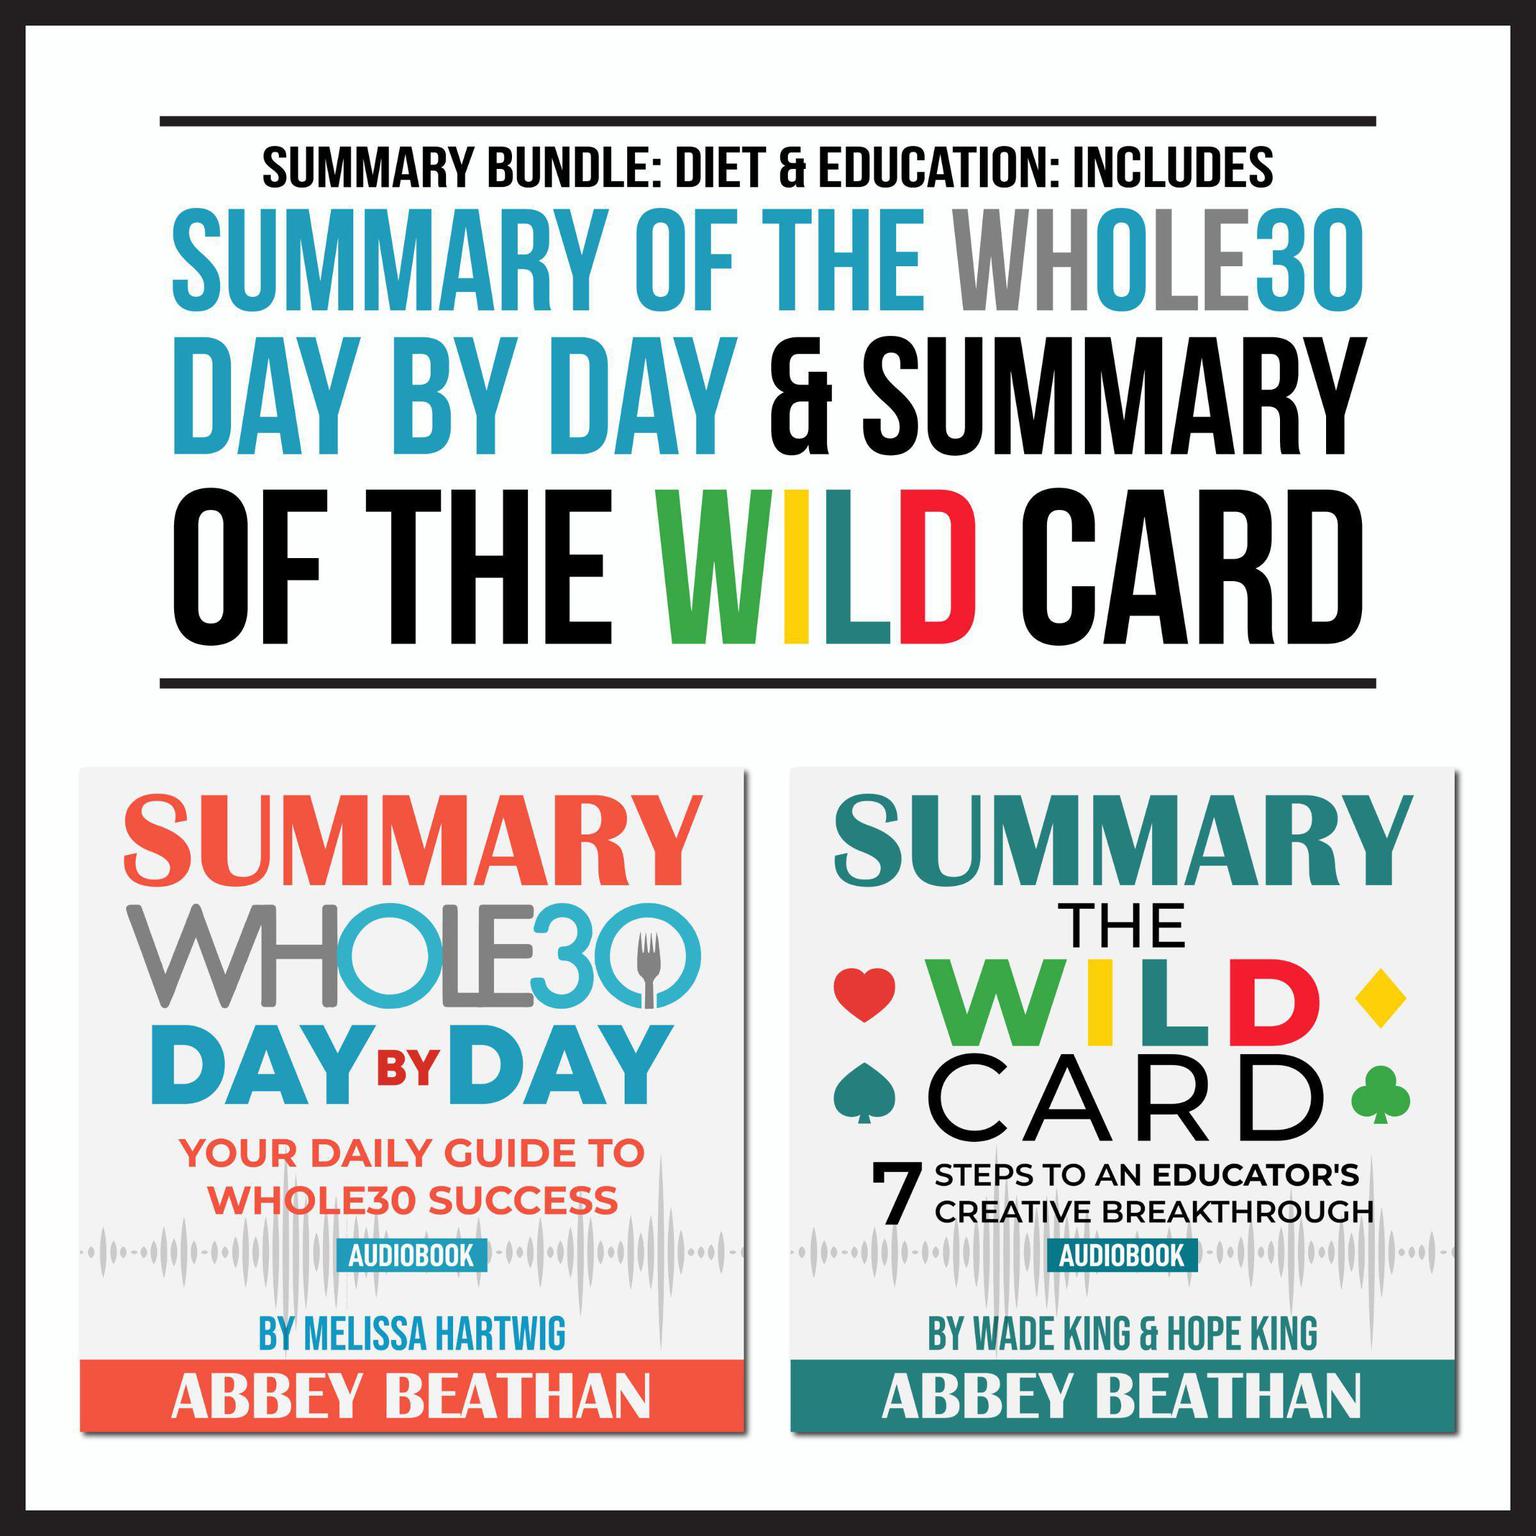 Summary Bundle: Diet & Education: Includes Summary of The Whole30 Day by Day & Summary of The Wild Card Audiobook, by Abbey Beathan